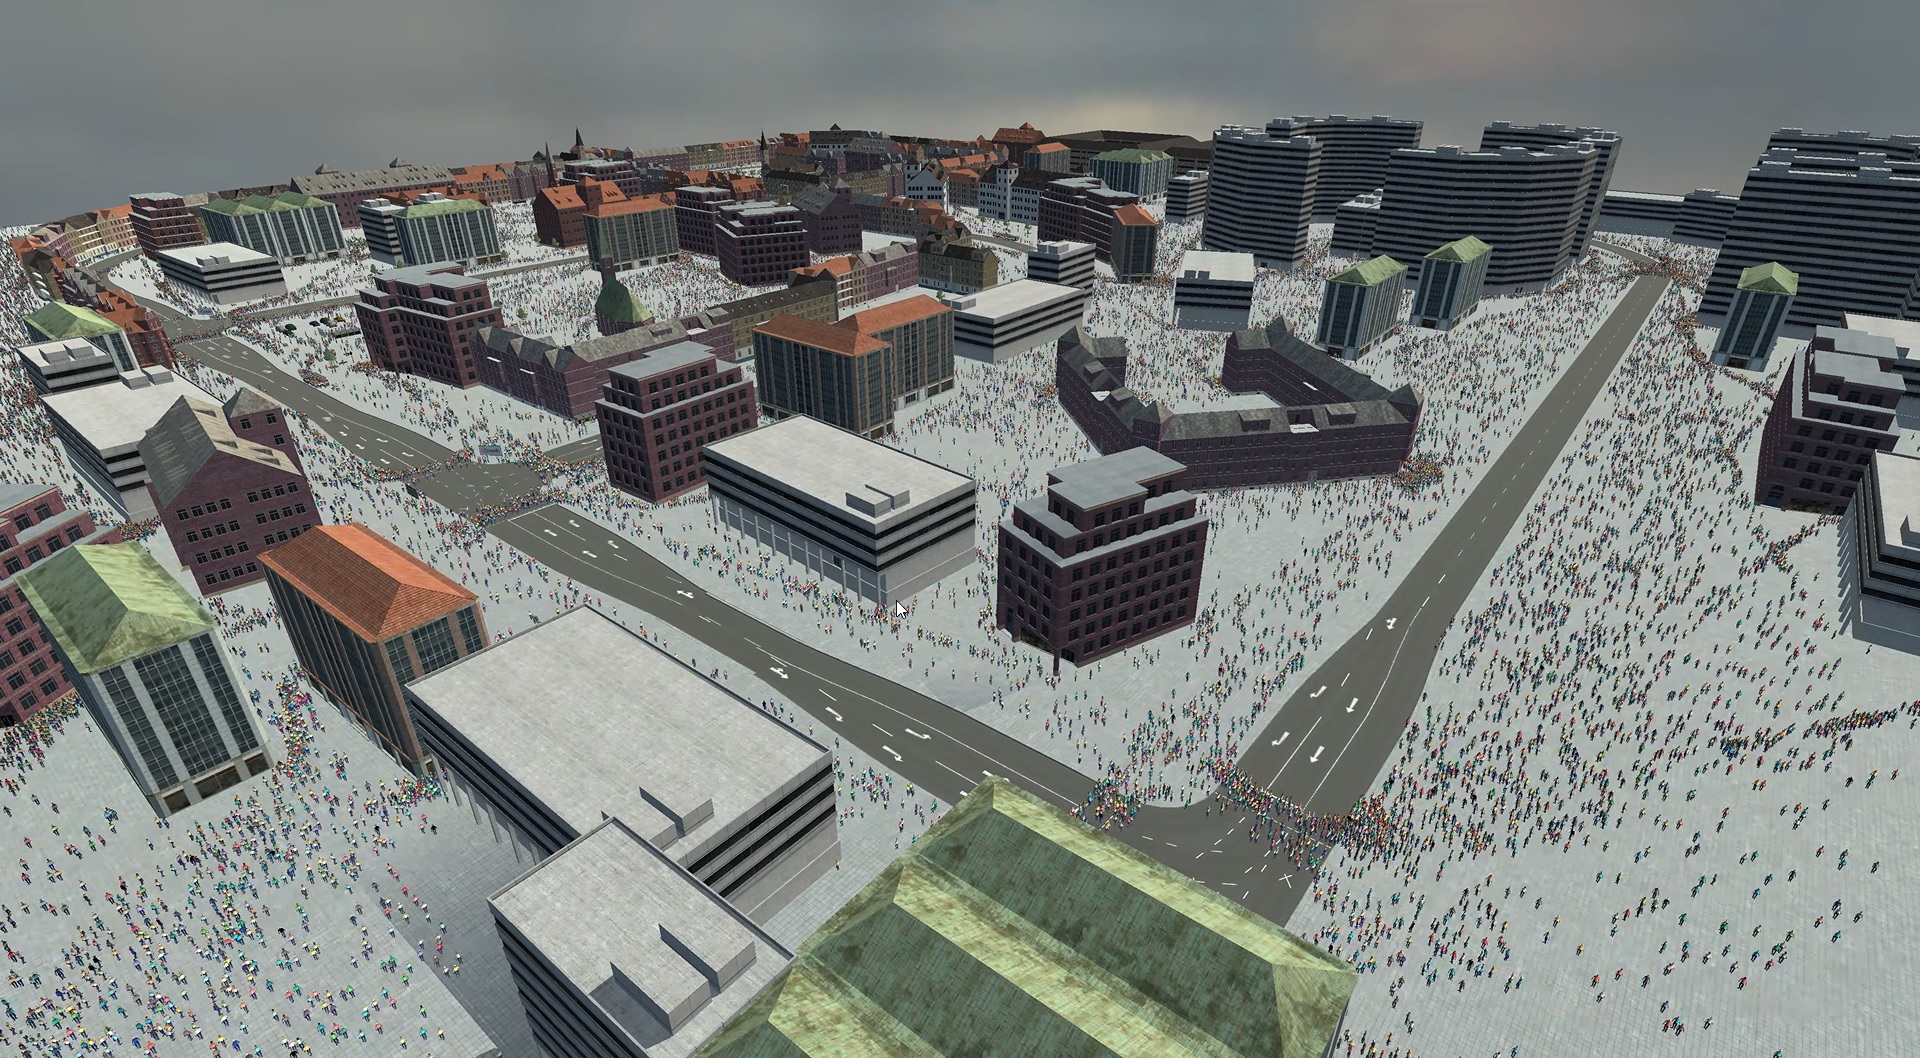 Real-time crowd simulation